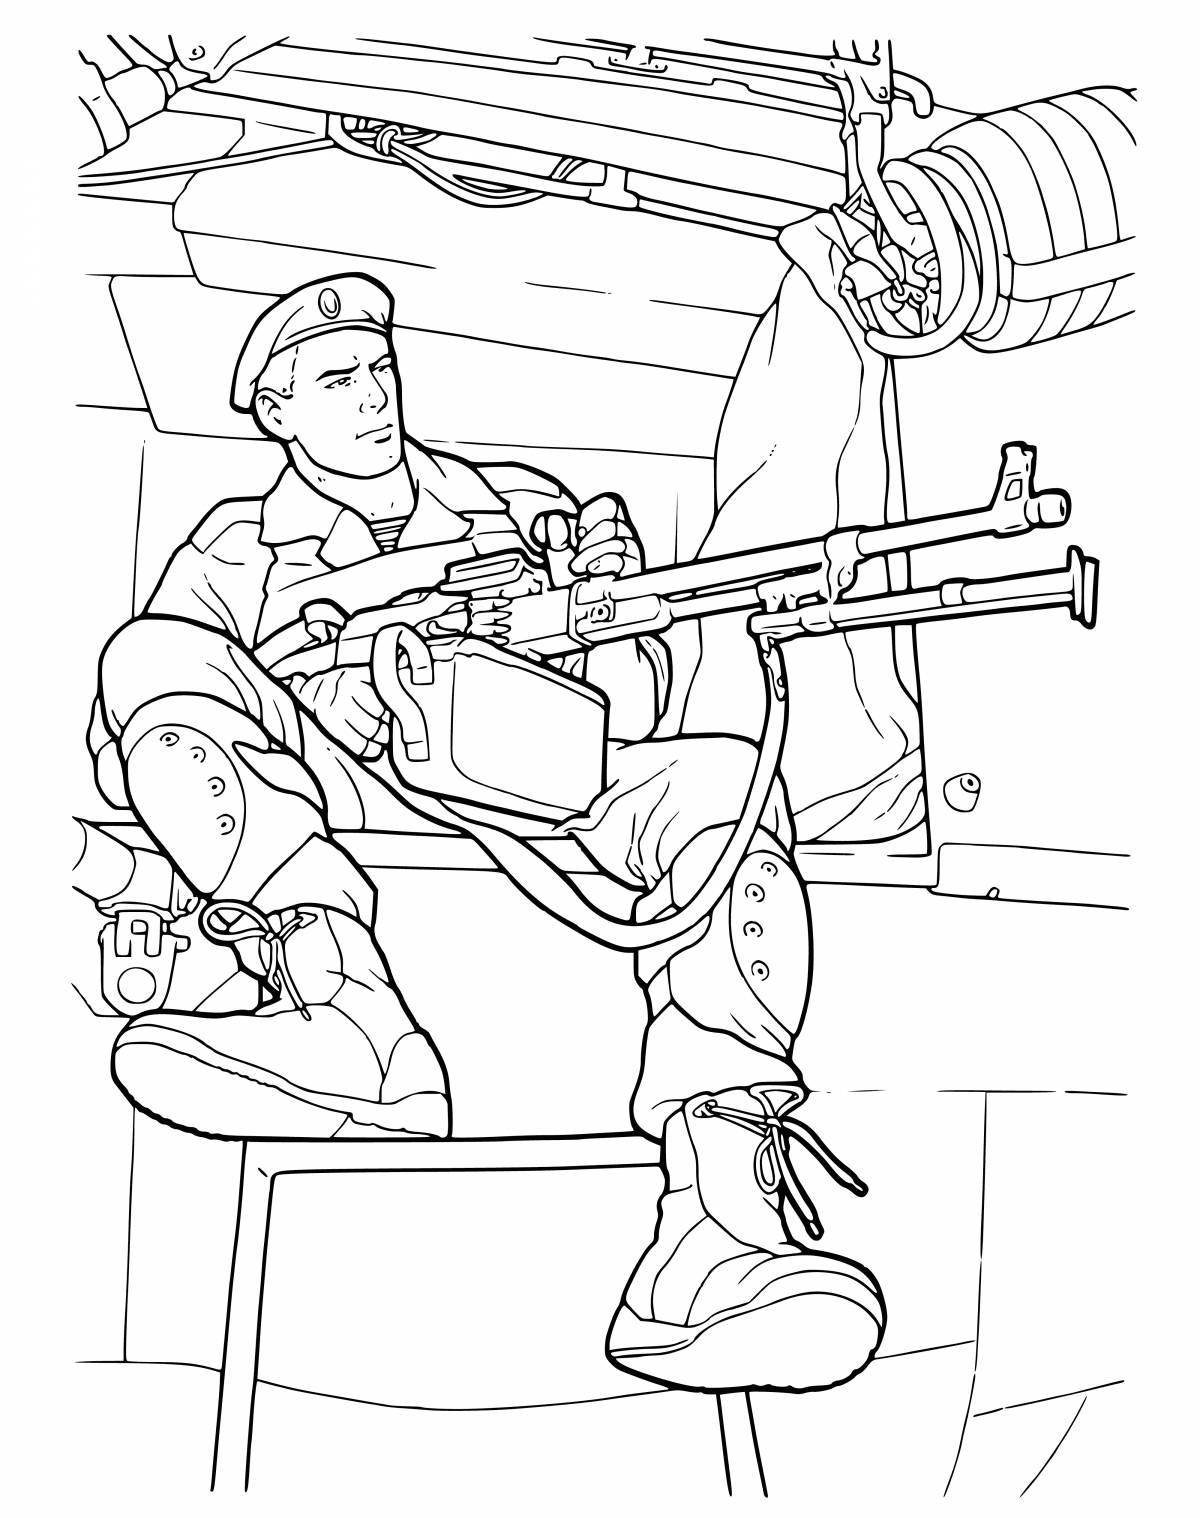 Great military soldier coloring pages